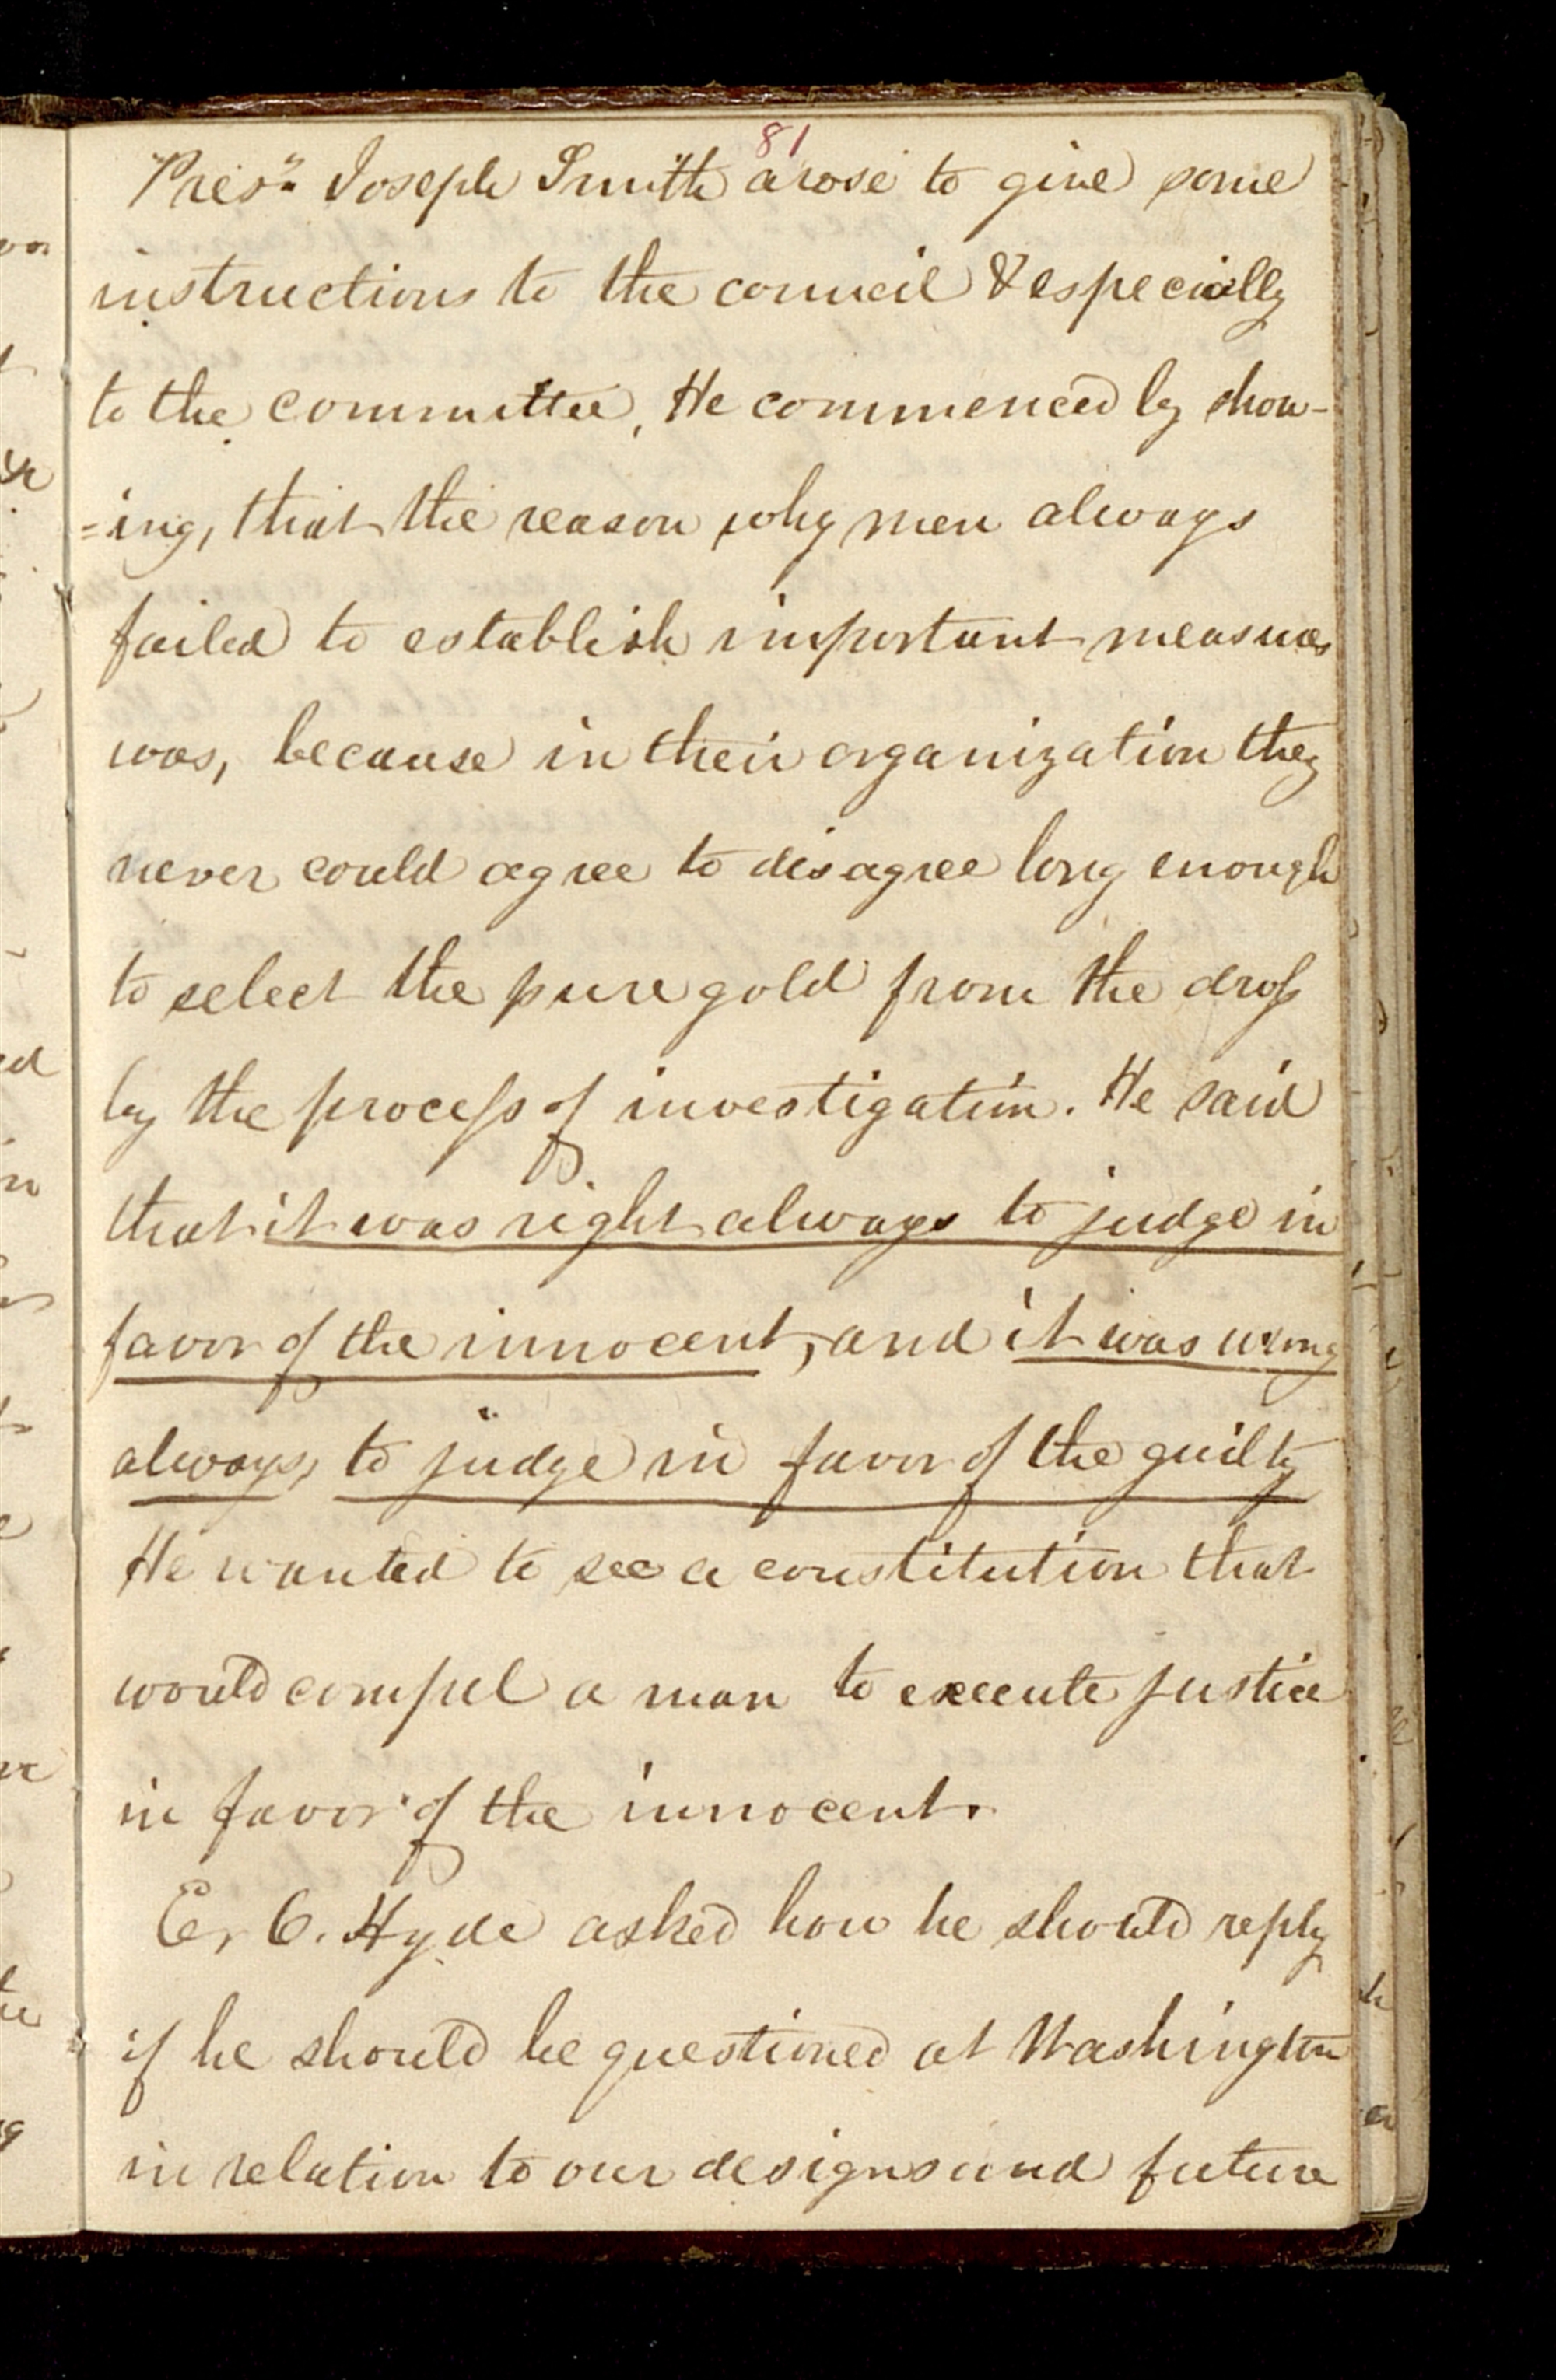 Minutes and Discourse, 4 April 1844, Page 81